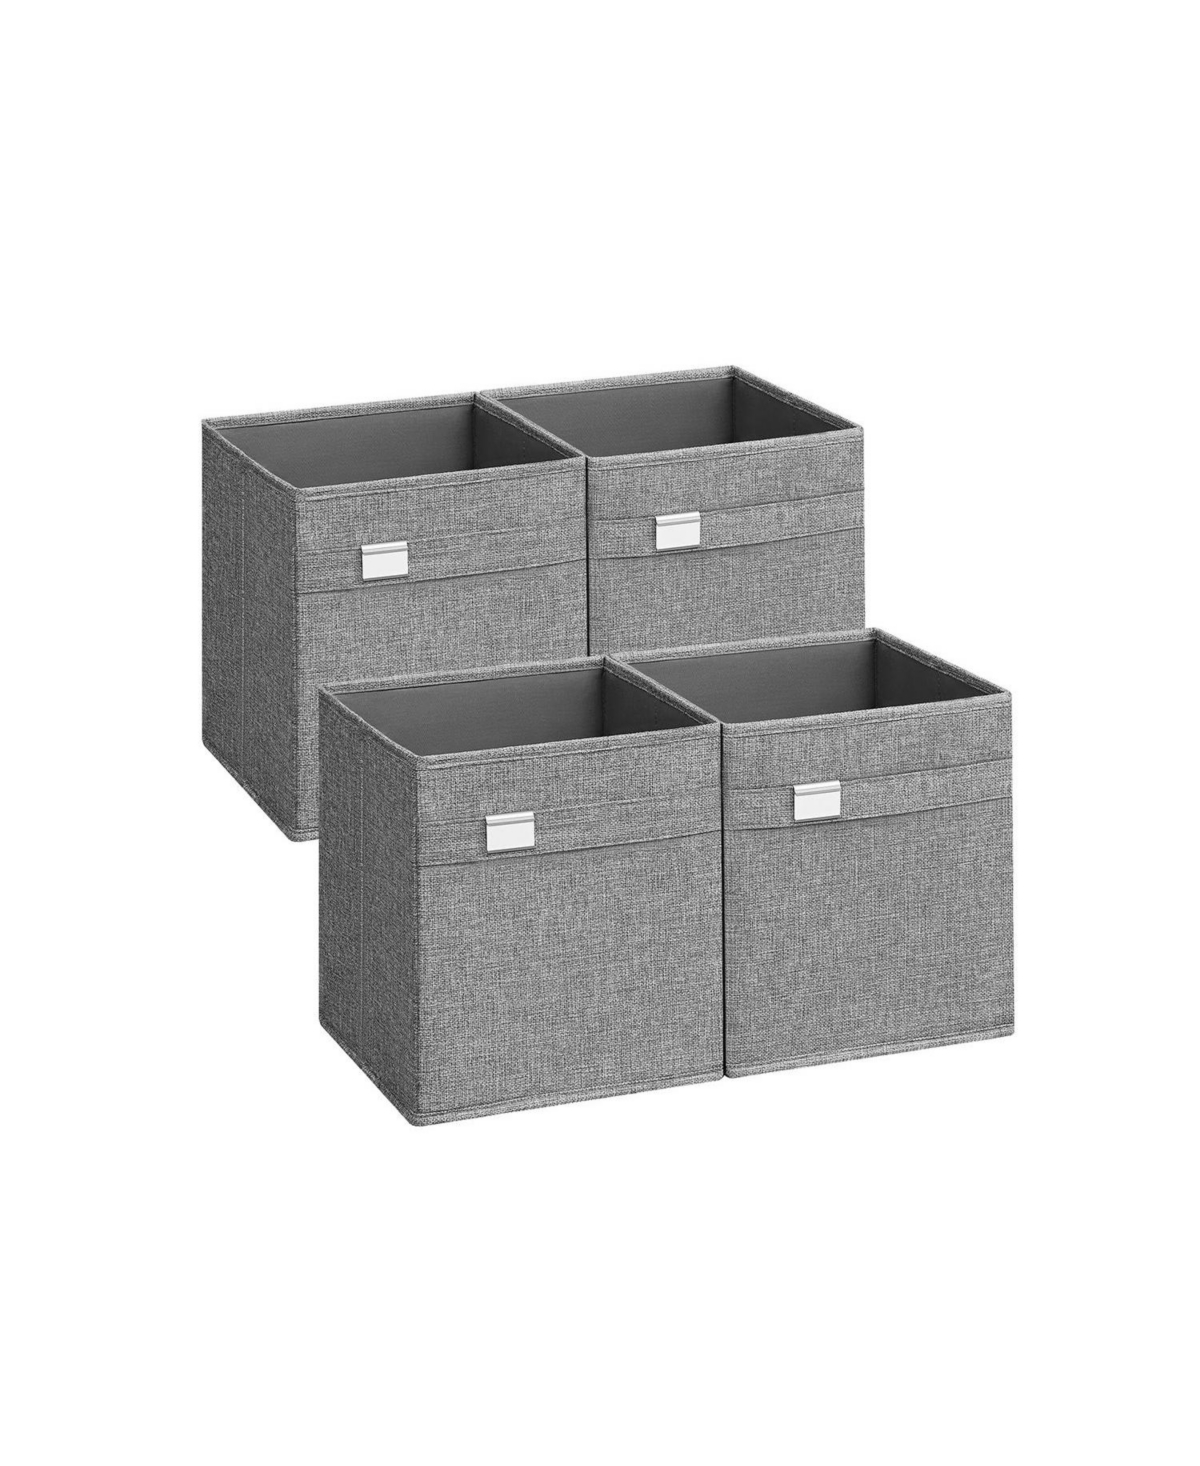 Storage Cubes, Set of 4 Cube Storage Bins, 2 Handles, Oxford Fabric and Linen-Look Fabric, Washable, Foldable, Metal Label Holders - Beige